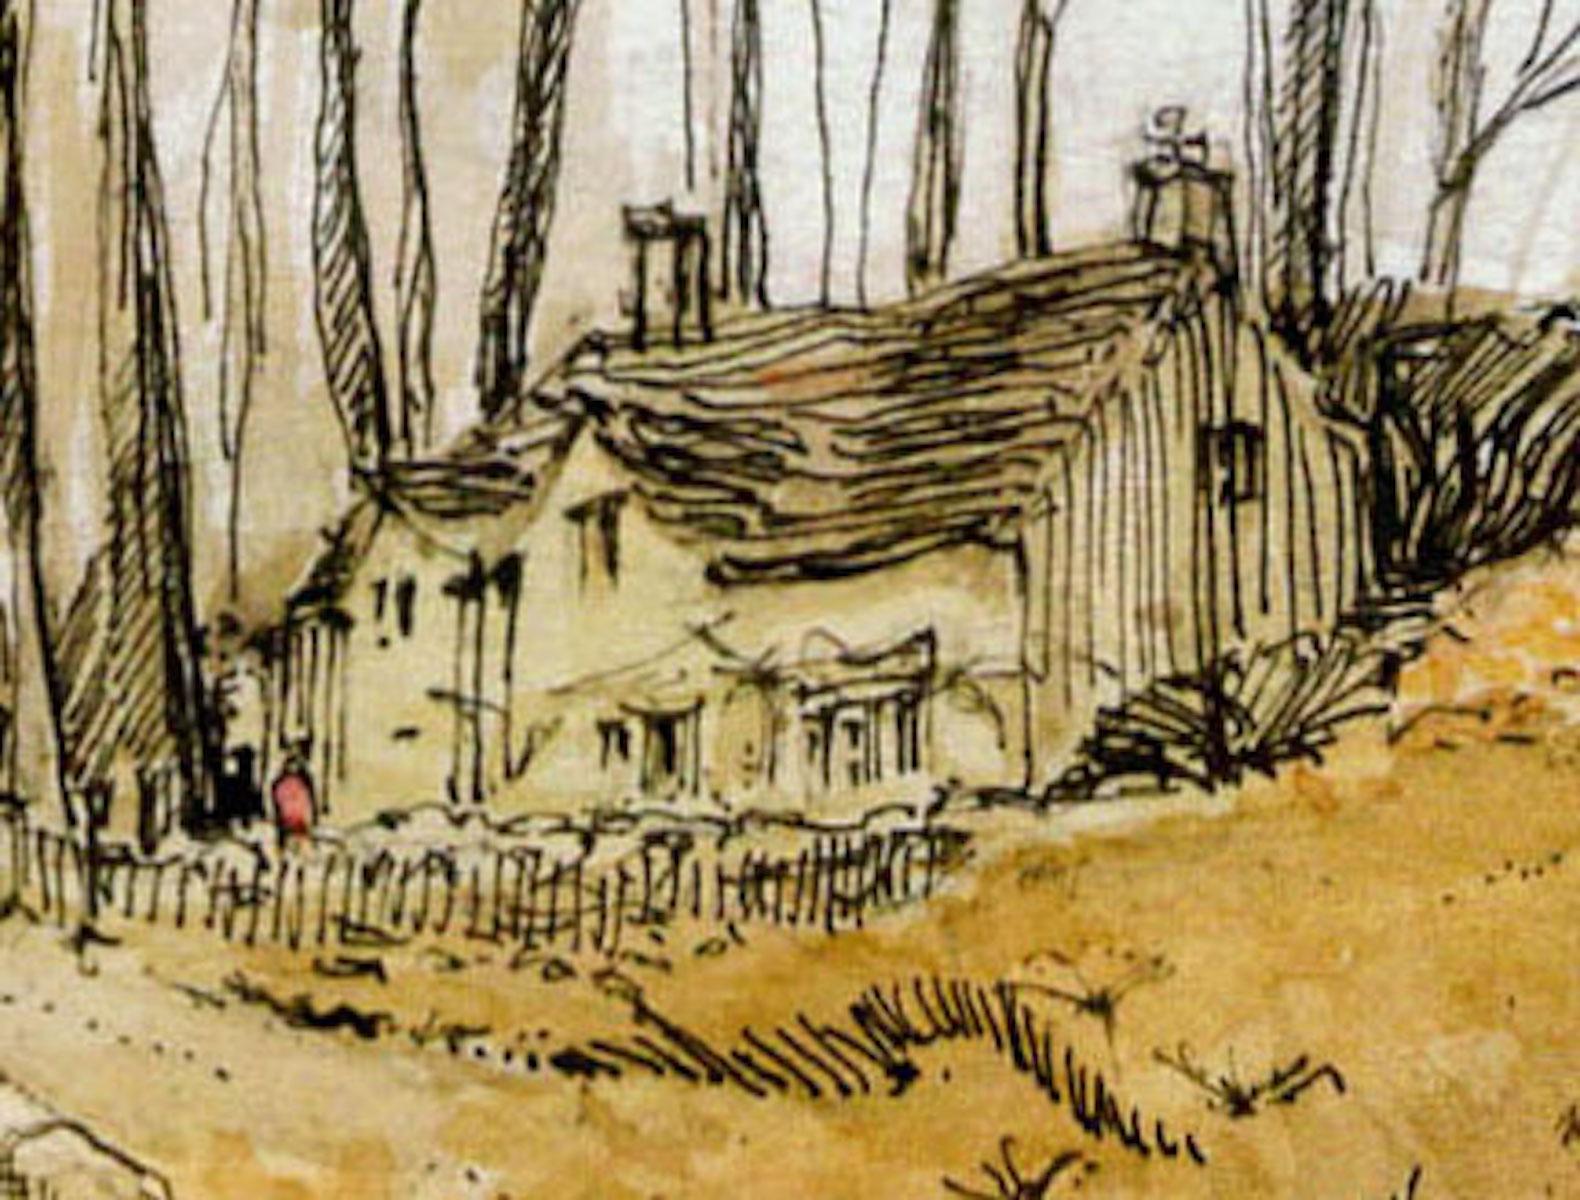 Cottage in Notgrove, Gloucestershire by Elizabeth Chalmers [2022]
original and hand signed by the artist 
Pen and Ink with Watercolour
Image size: H:33.5cm cm x W:26.0cm cm
Complete Size of Unframed Work: H:33.5cm cm x W:26.0 cm x D:1mmcm
Sold